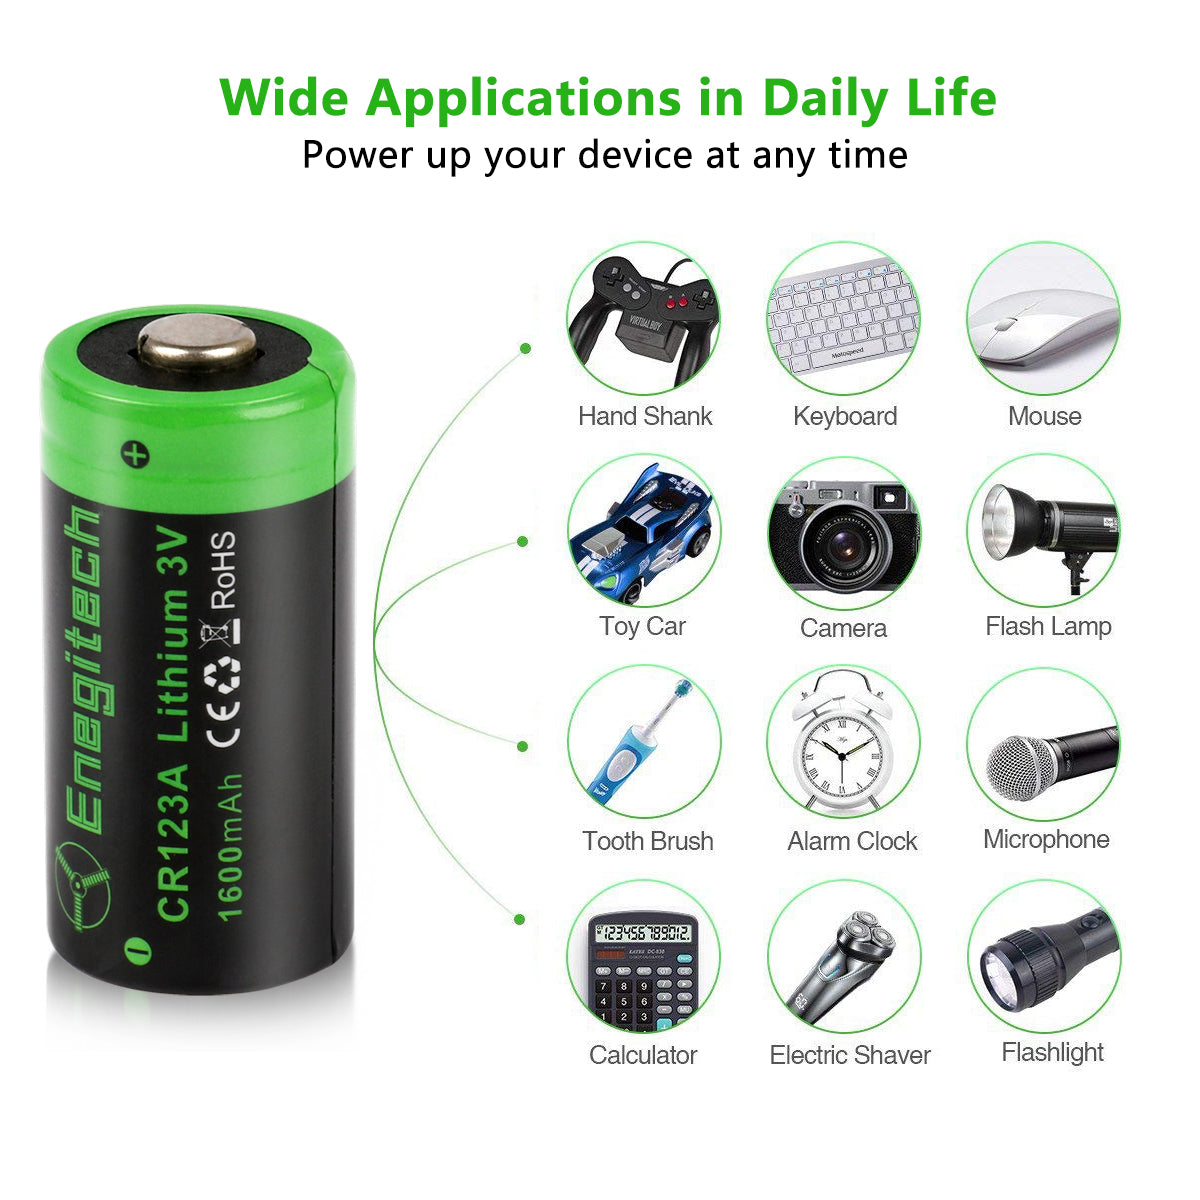 [Upgraded] CR123A 3V Lithium Non-Rechargeable Batteries 1600mAh - 6 Packs